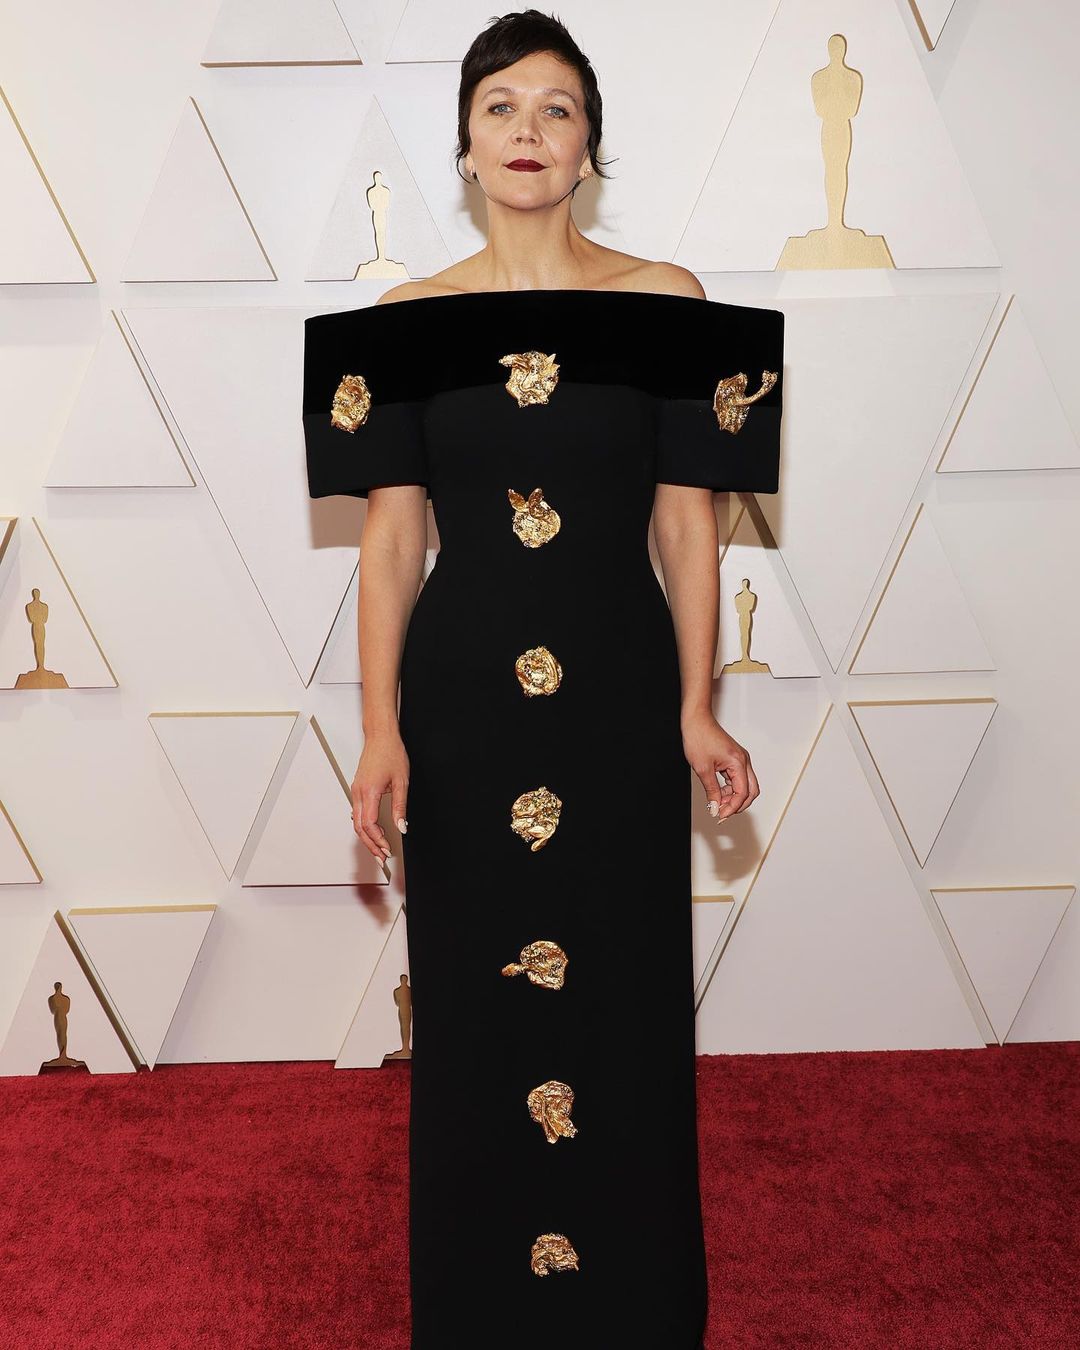 Maggie Gyllenhaal makes a dramatic statement in a Schiaparelli gown